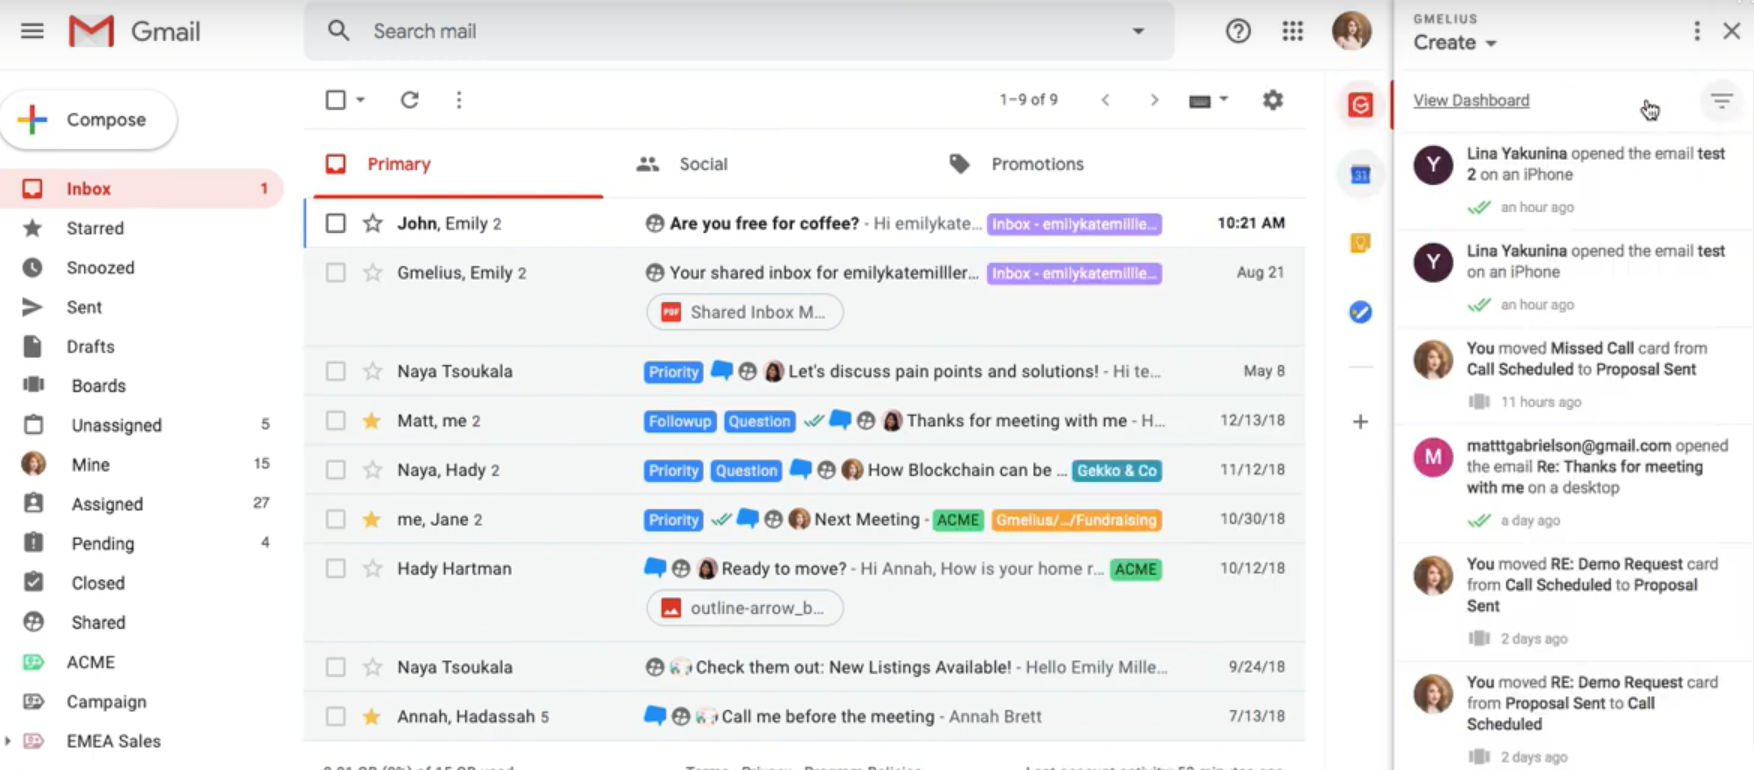 Gmelius interface within Gmail